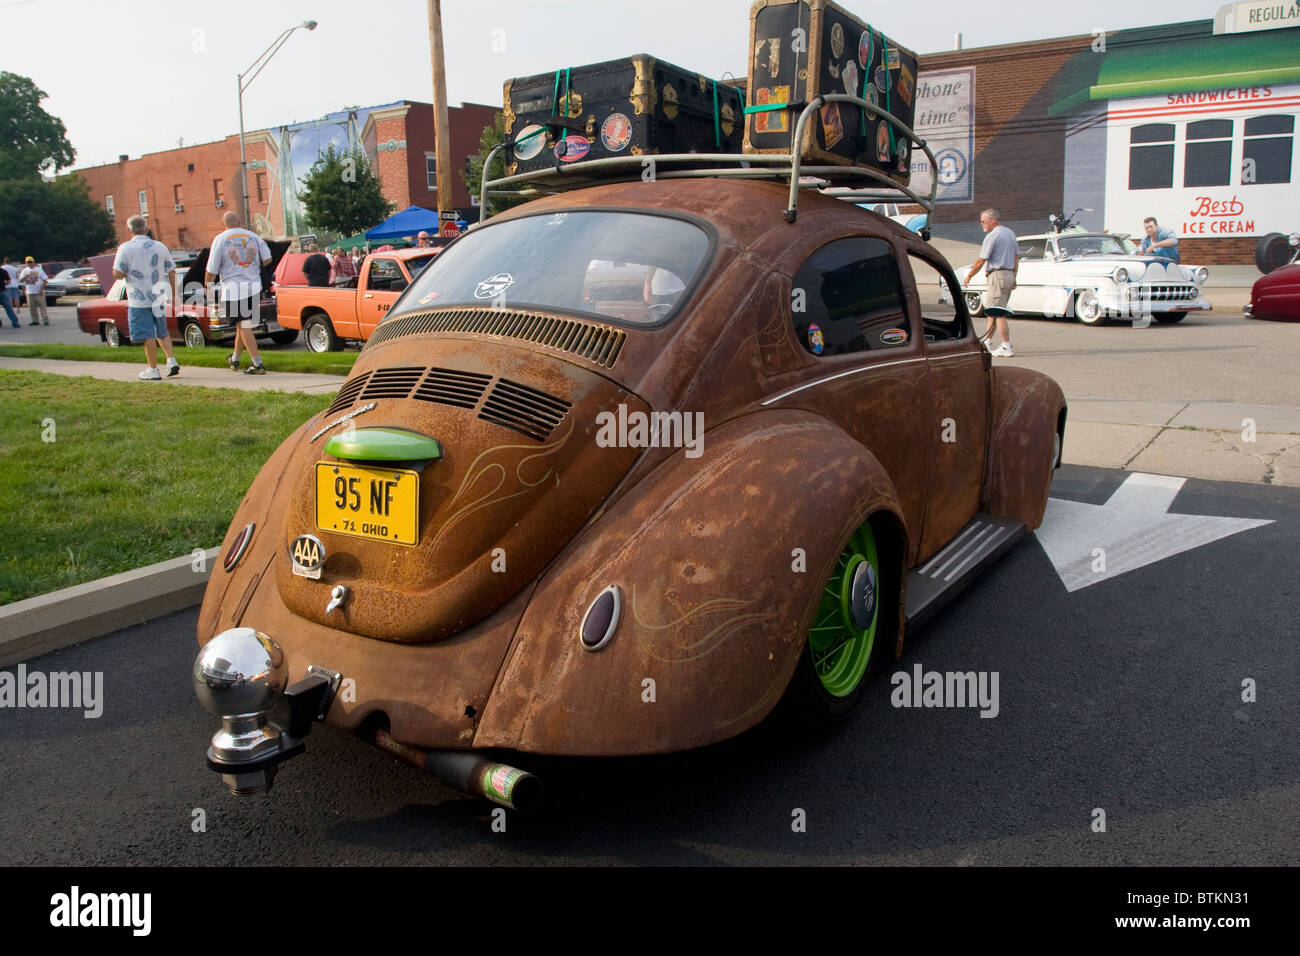 Auto- 1971 Volkswagon Beetle with modified shape, lots of rust, and extremely large trailer hitch. 95NF Stock Photo